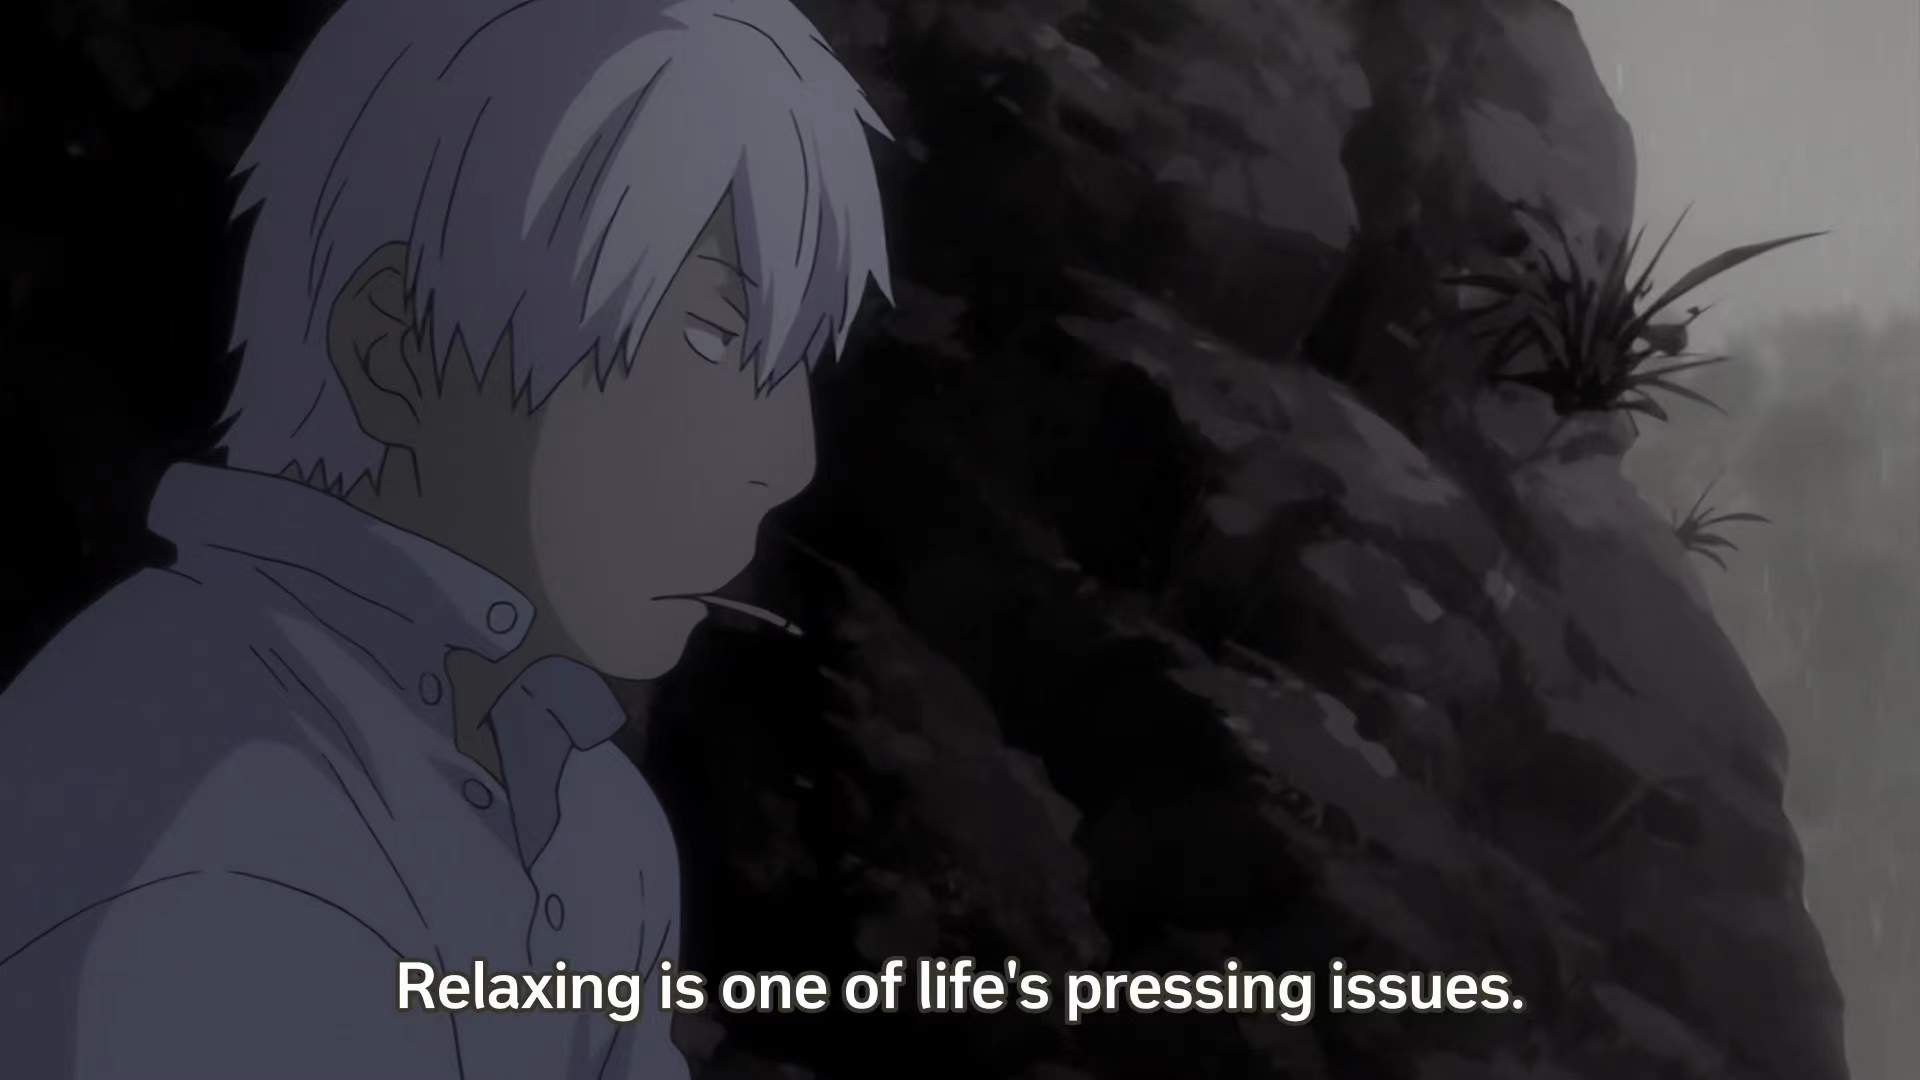 The white-haired protagonist of Mushishi, Ginko, muses that “Relaxing is one of life’s pressing issues” while smoking